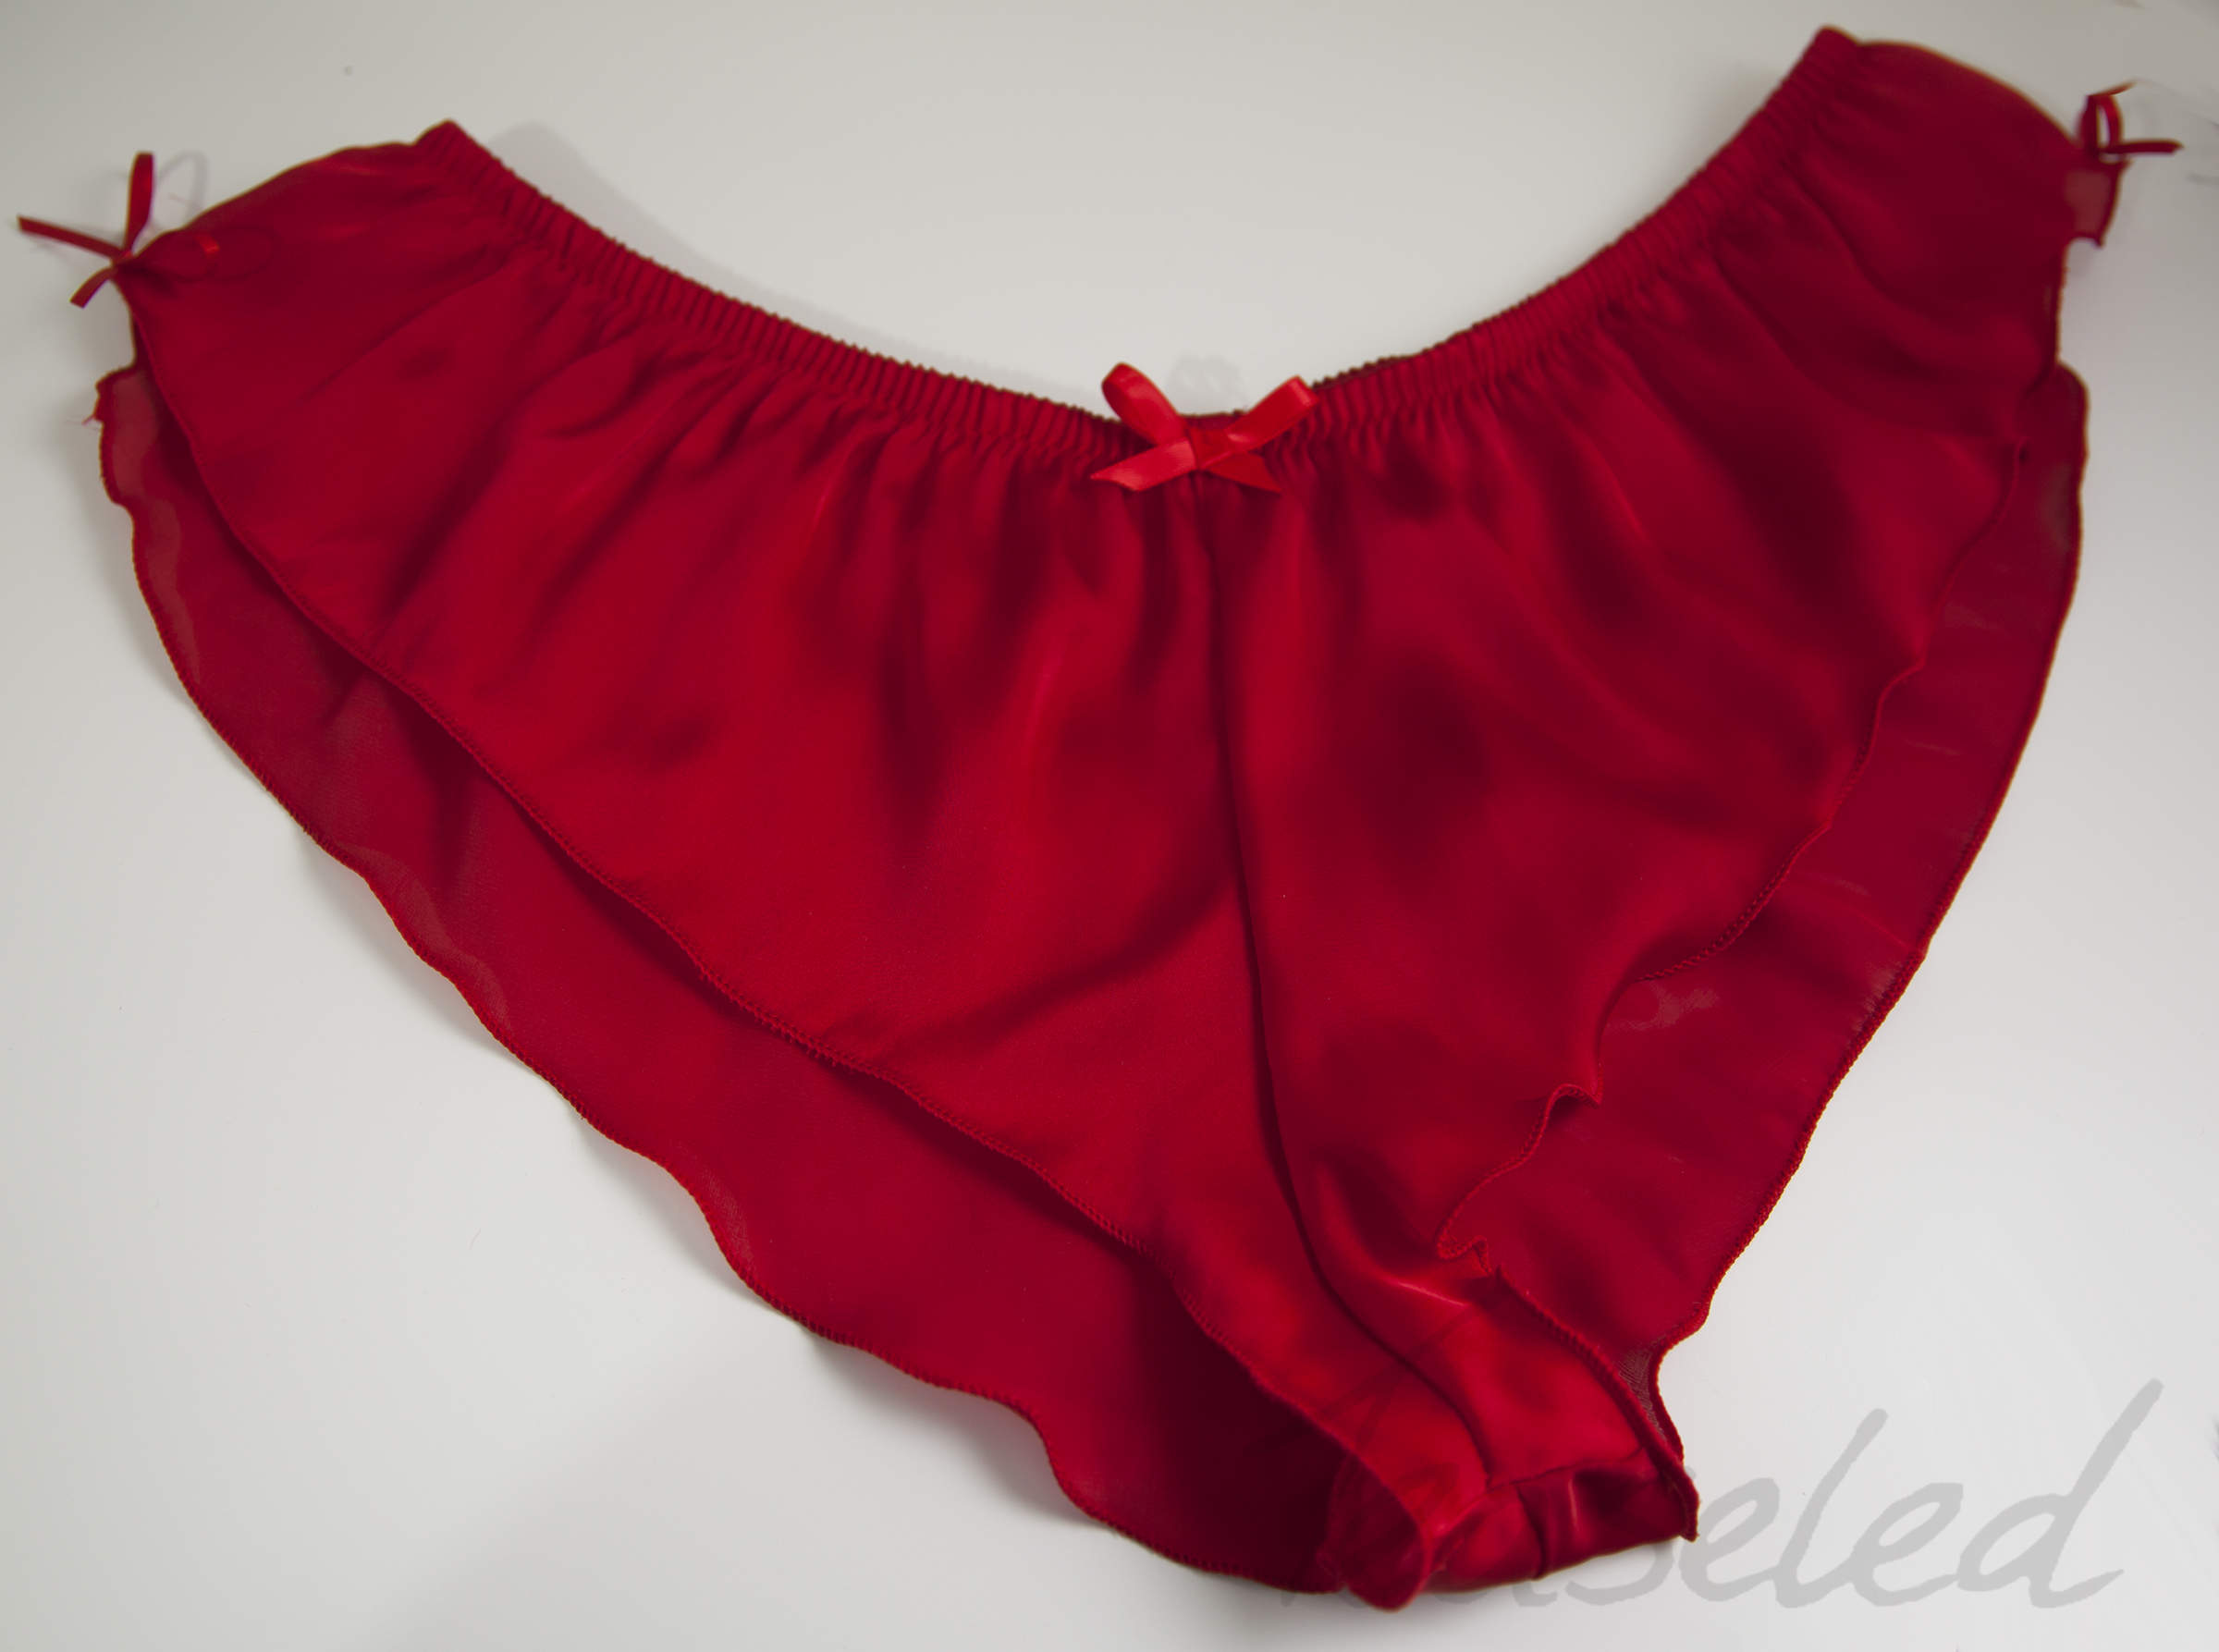 Micro Silky Satin French Knickers Red